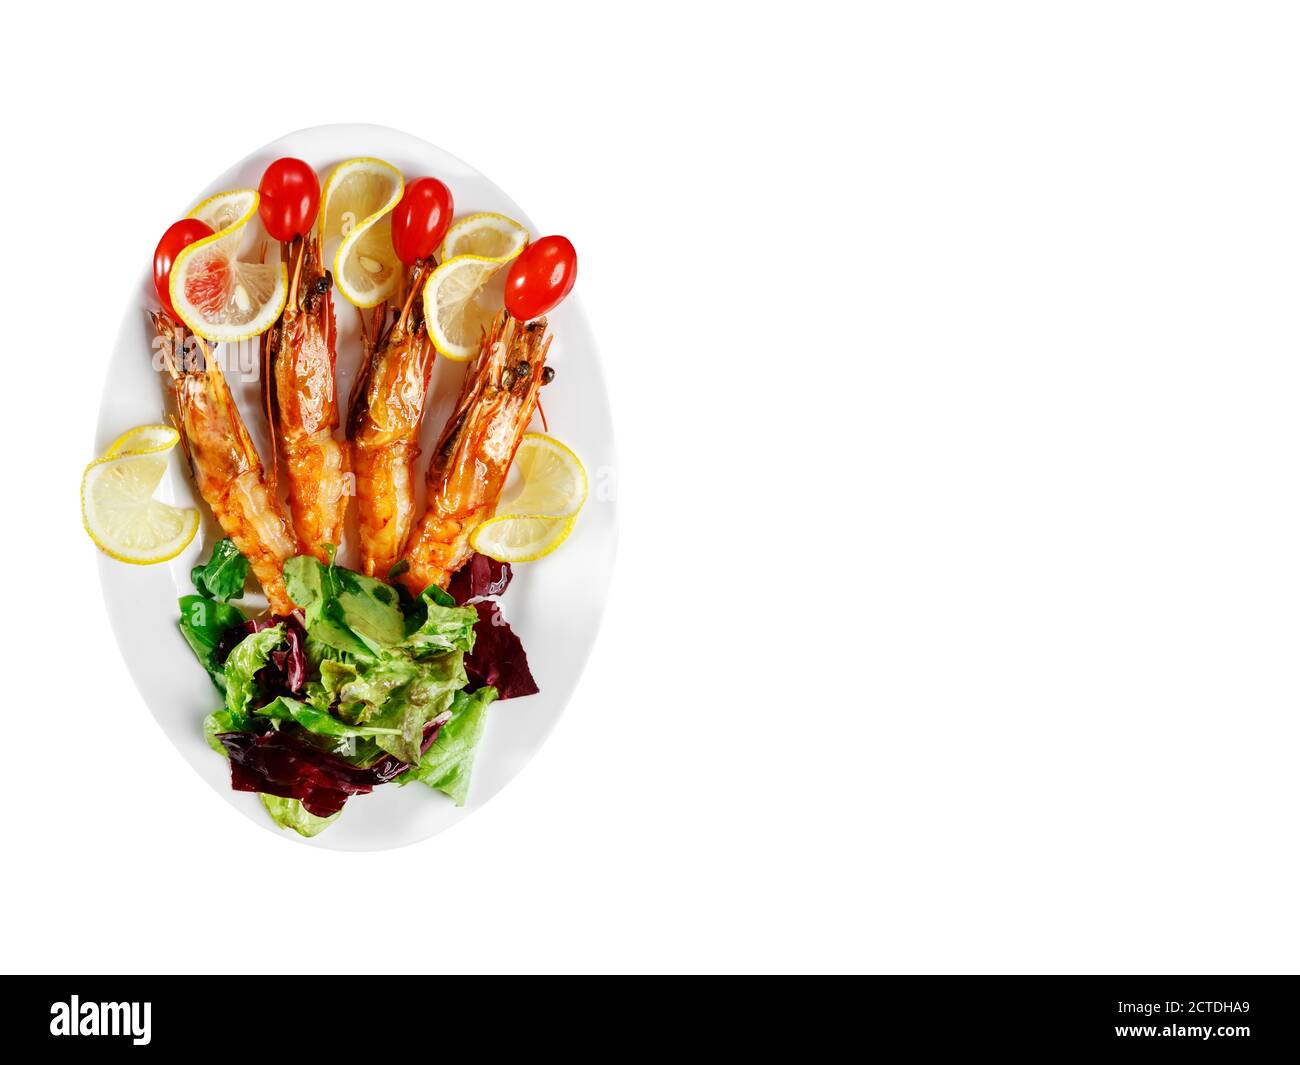 The head of the fish, mussels, greens and prawns are on a white plate. Restaurant service. Space for text Stock Photo